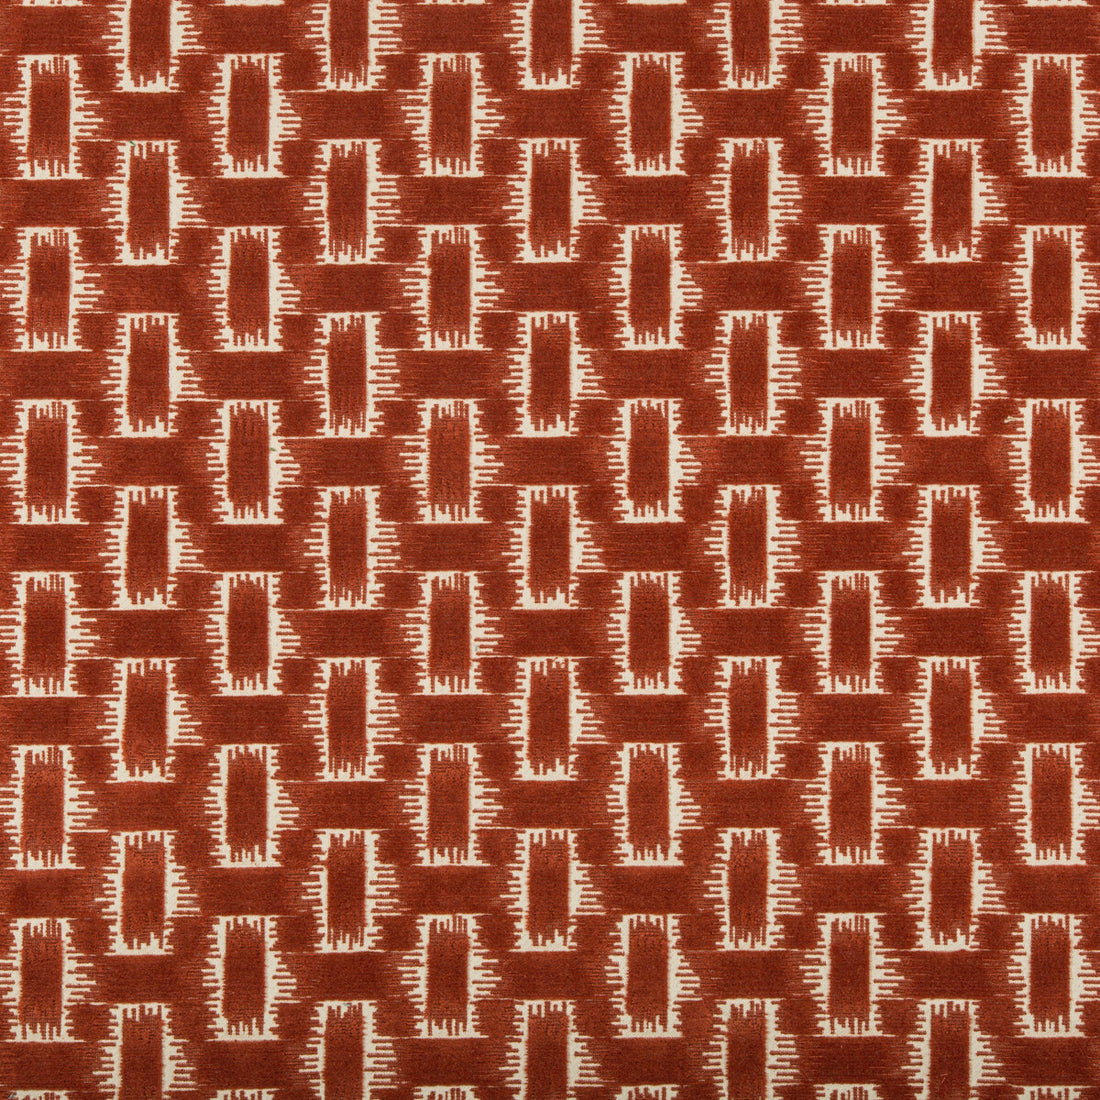 Chambord Velvet fabric in saffron color - pattern 8020116.22.0 - by Brunschwig &amp; Fils in the Chaumont Velvets collection